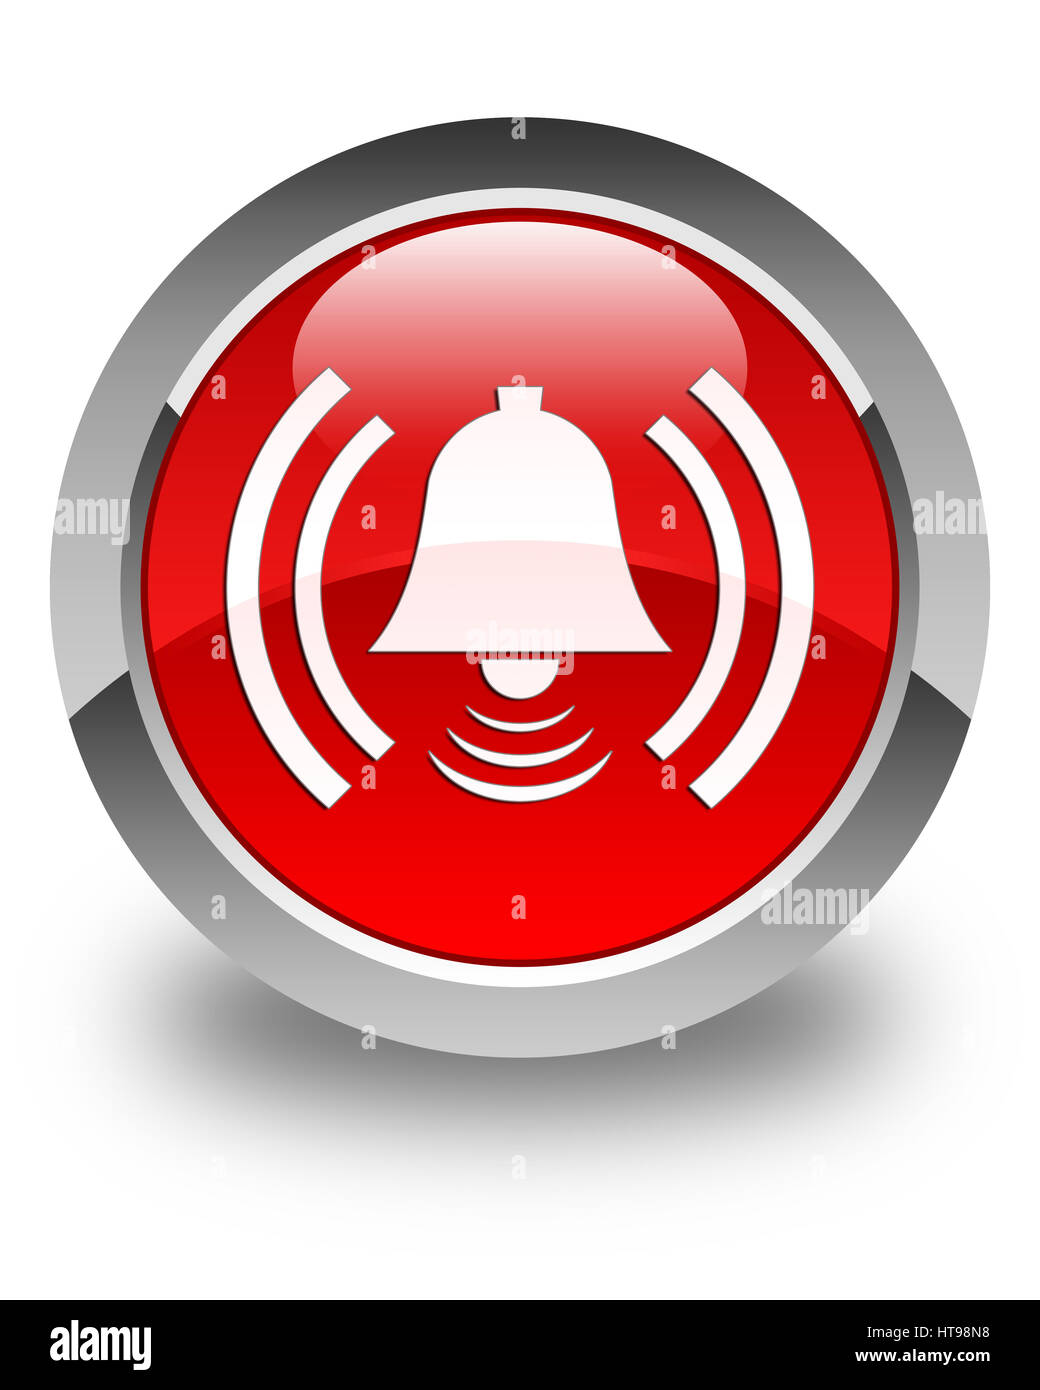 https://c8.alamy.com/comp/HT98N8/alarm-icon-isolated-on-glossy-red-round-button-abstract-illustration-HT98N8.jpg